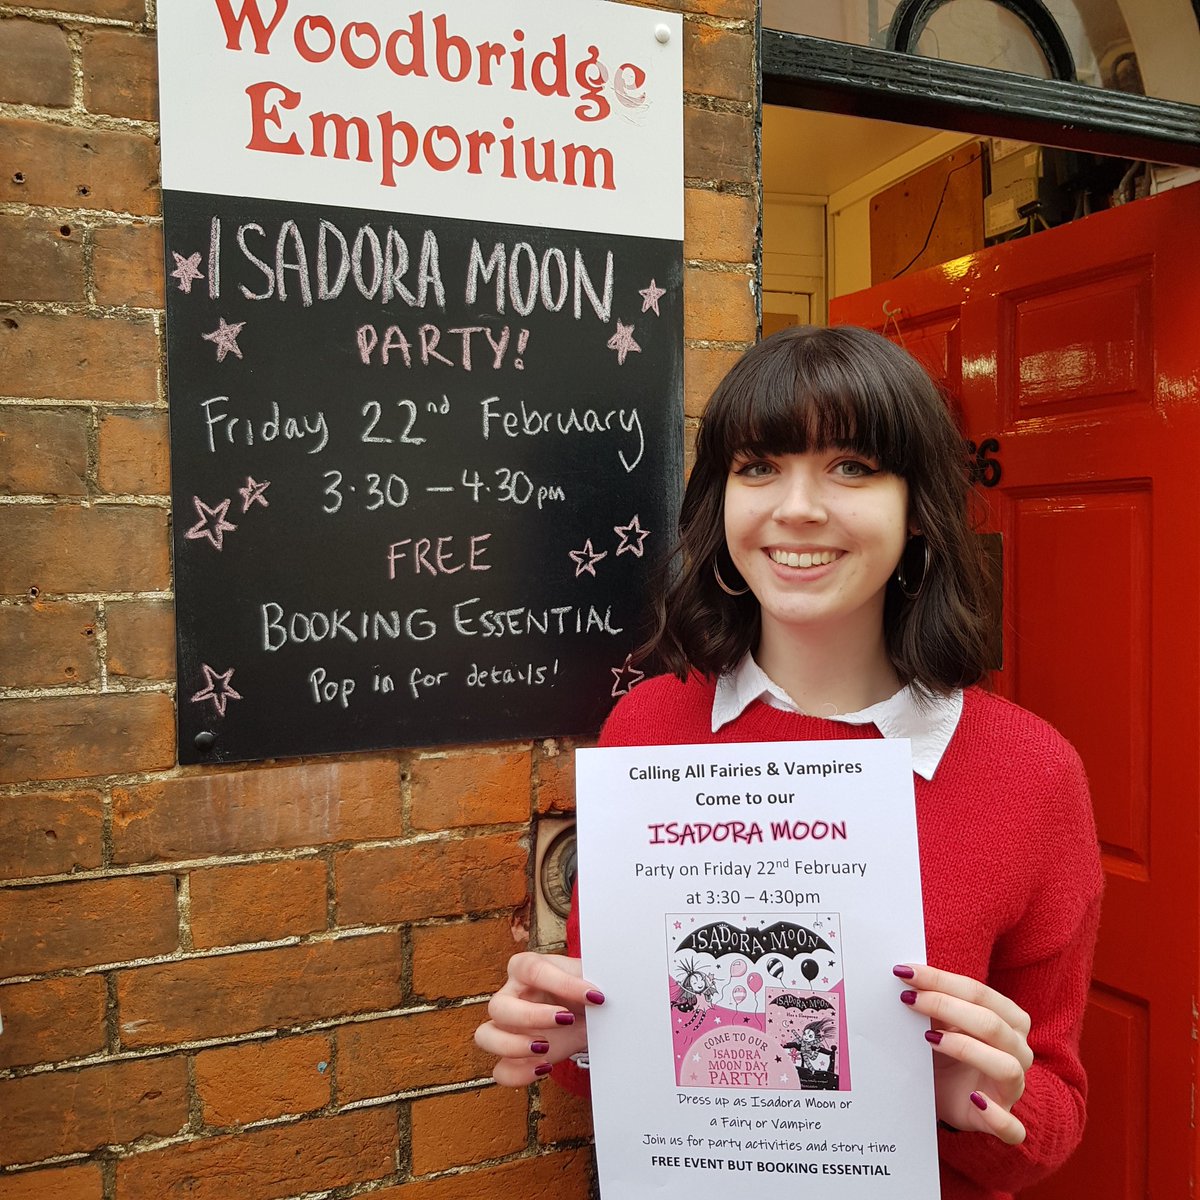 Calling all little Fairies and Vampires, Please come to our ISADORA MOON Party on Friday 22nd Feb at 3.30pm. Free event but Booking essential 
#ChildrensEvent #IsadoraMoon